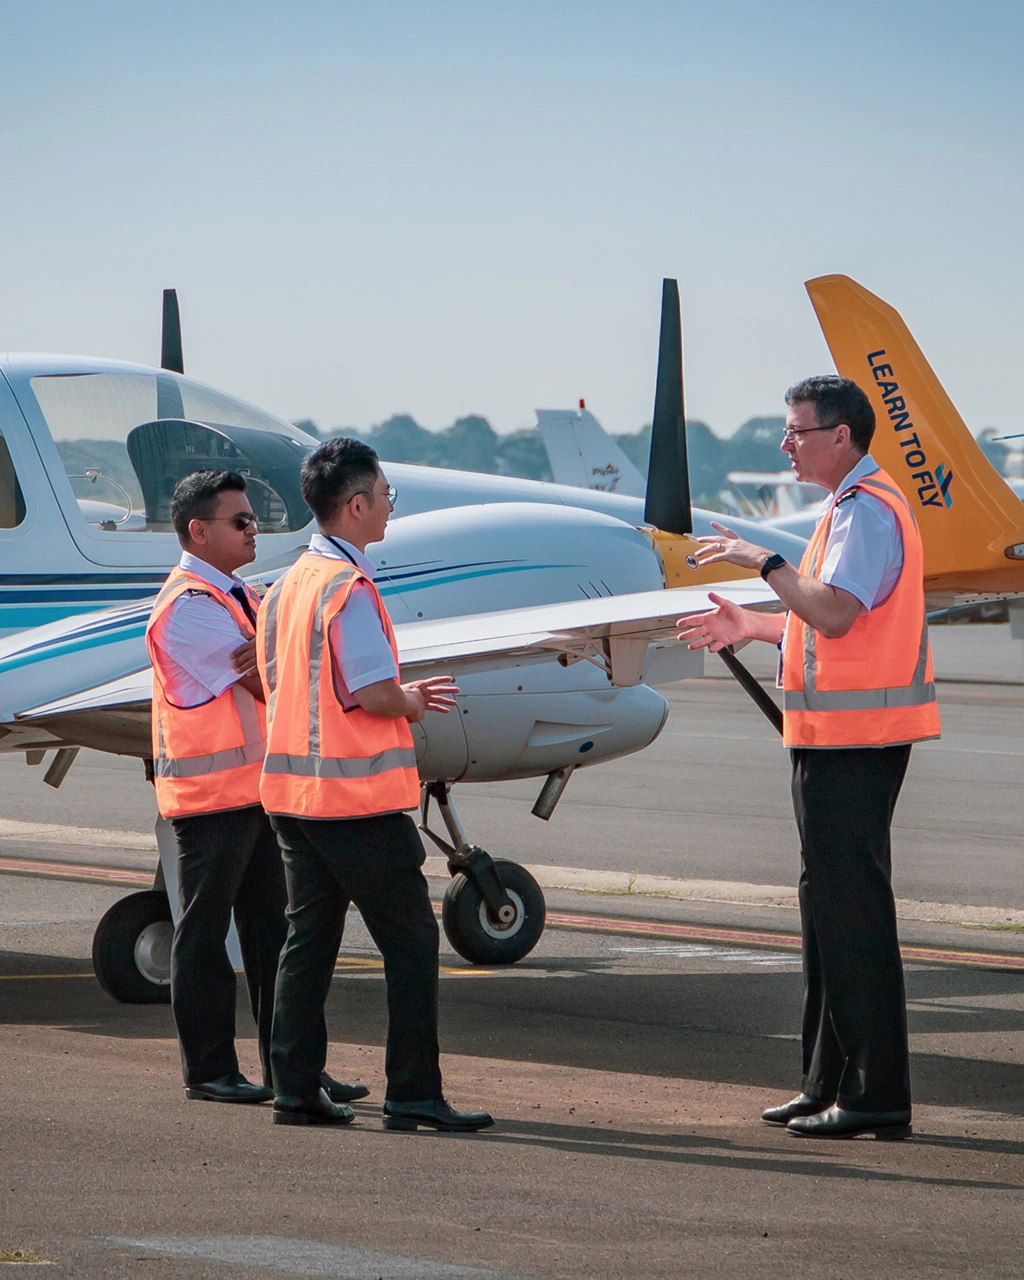 Learn To Fly Student Life: Starting Flight Training in Melbourne